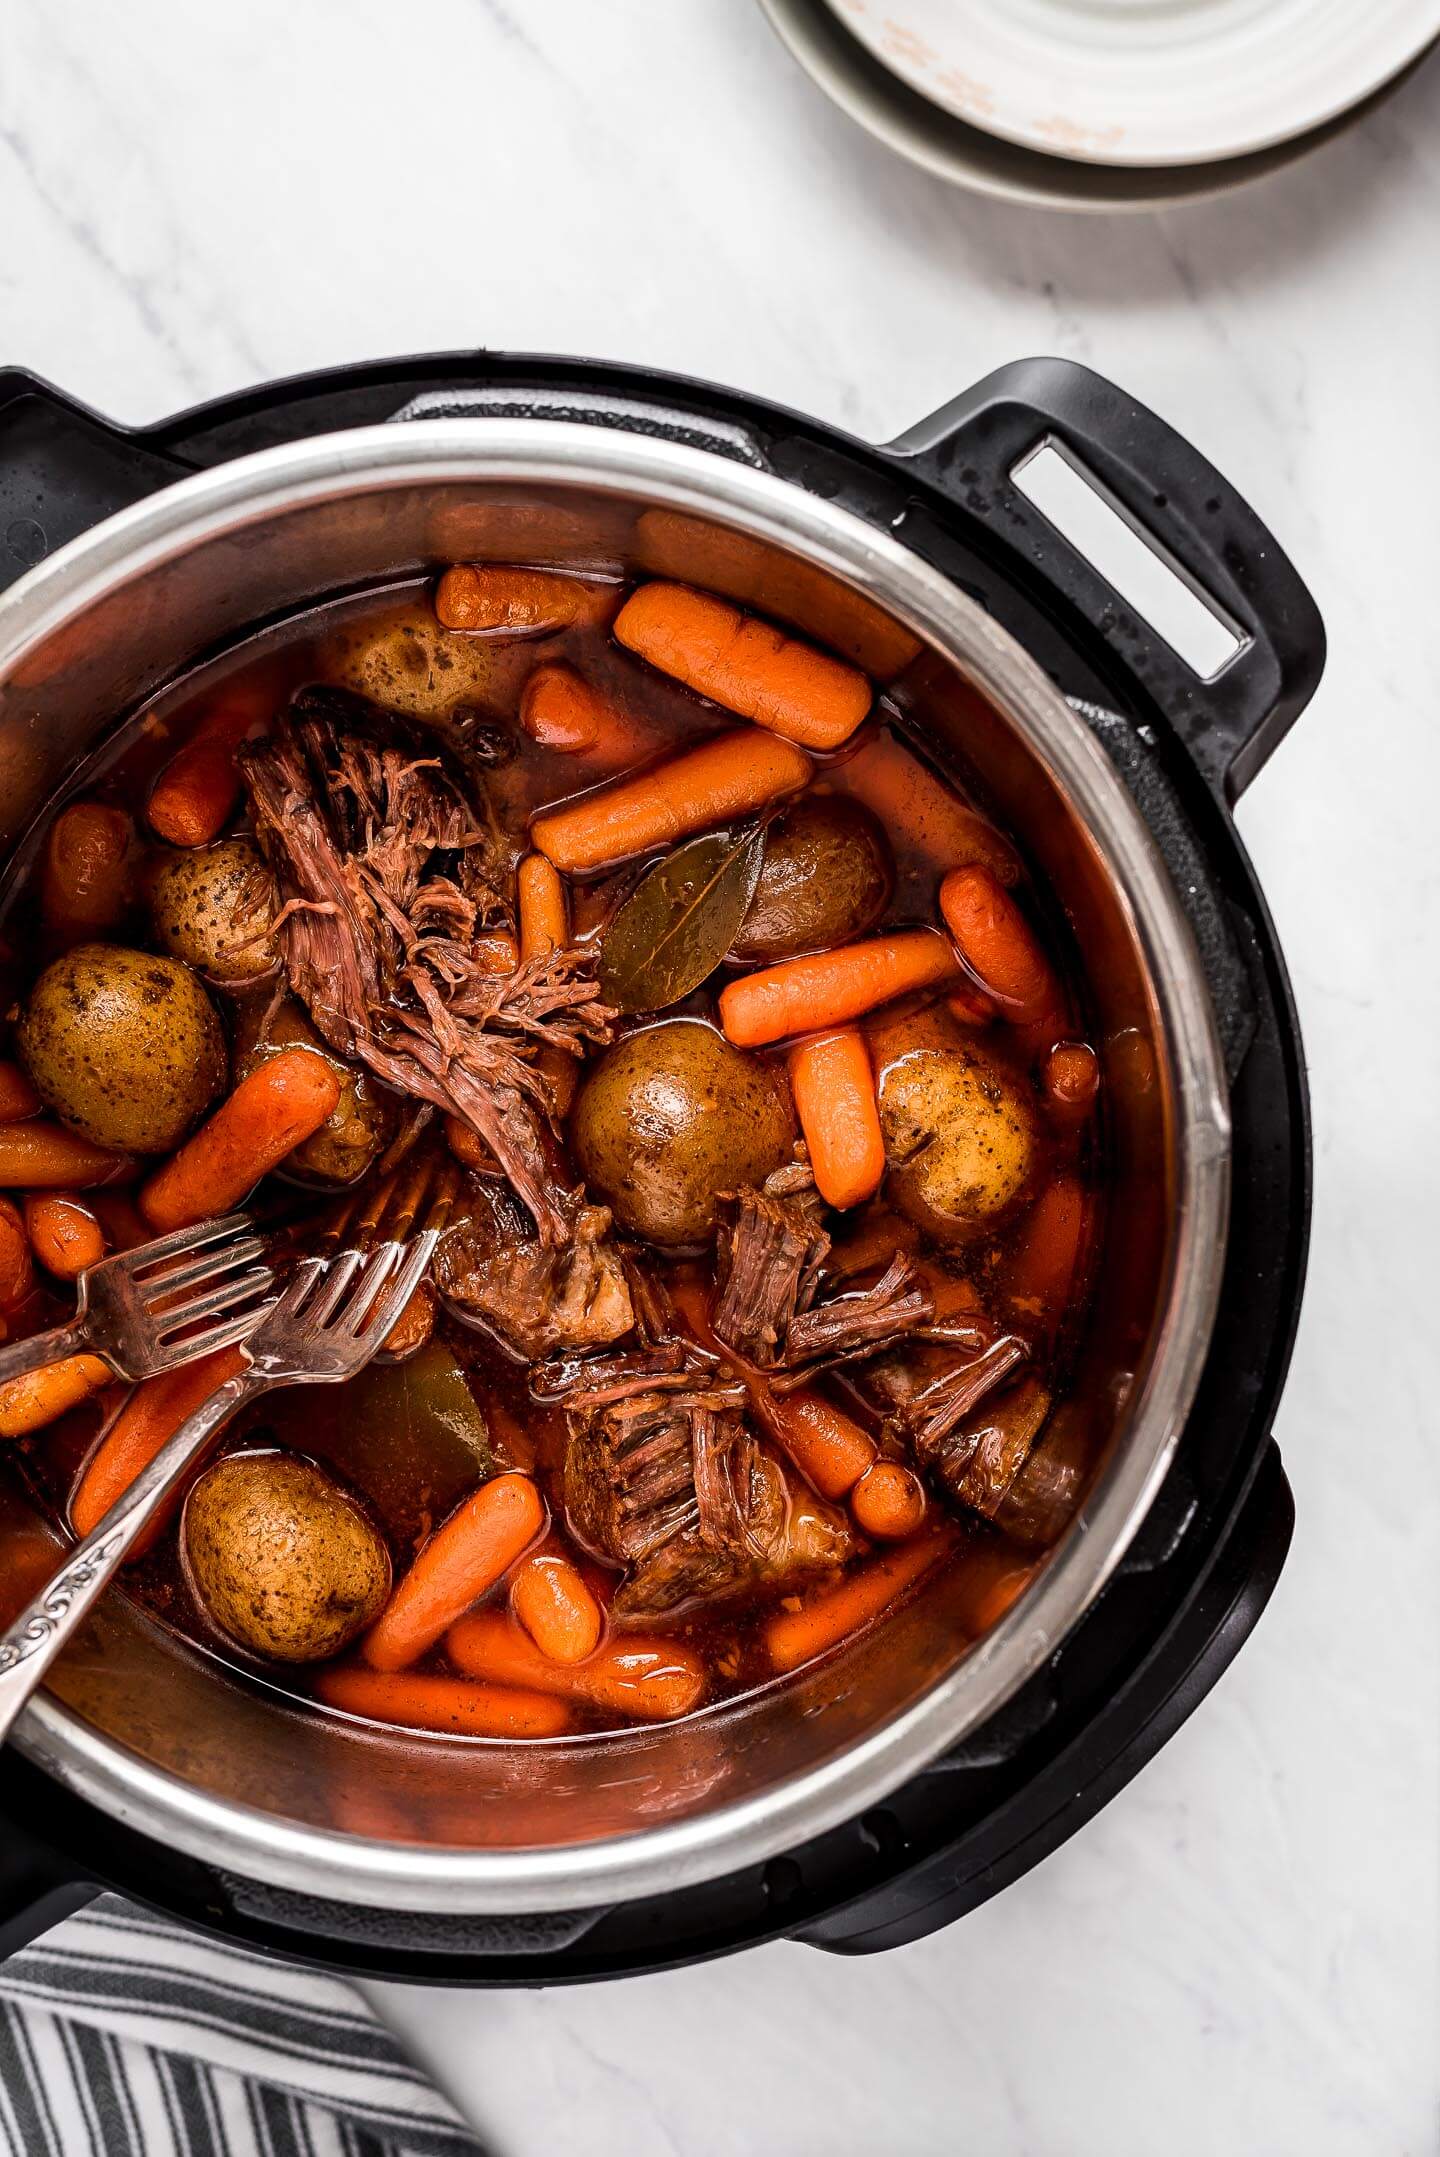 Beef, potatoes, carrots, and broth in an Instant Pot.